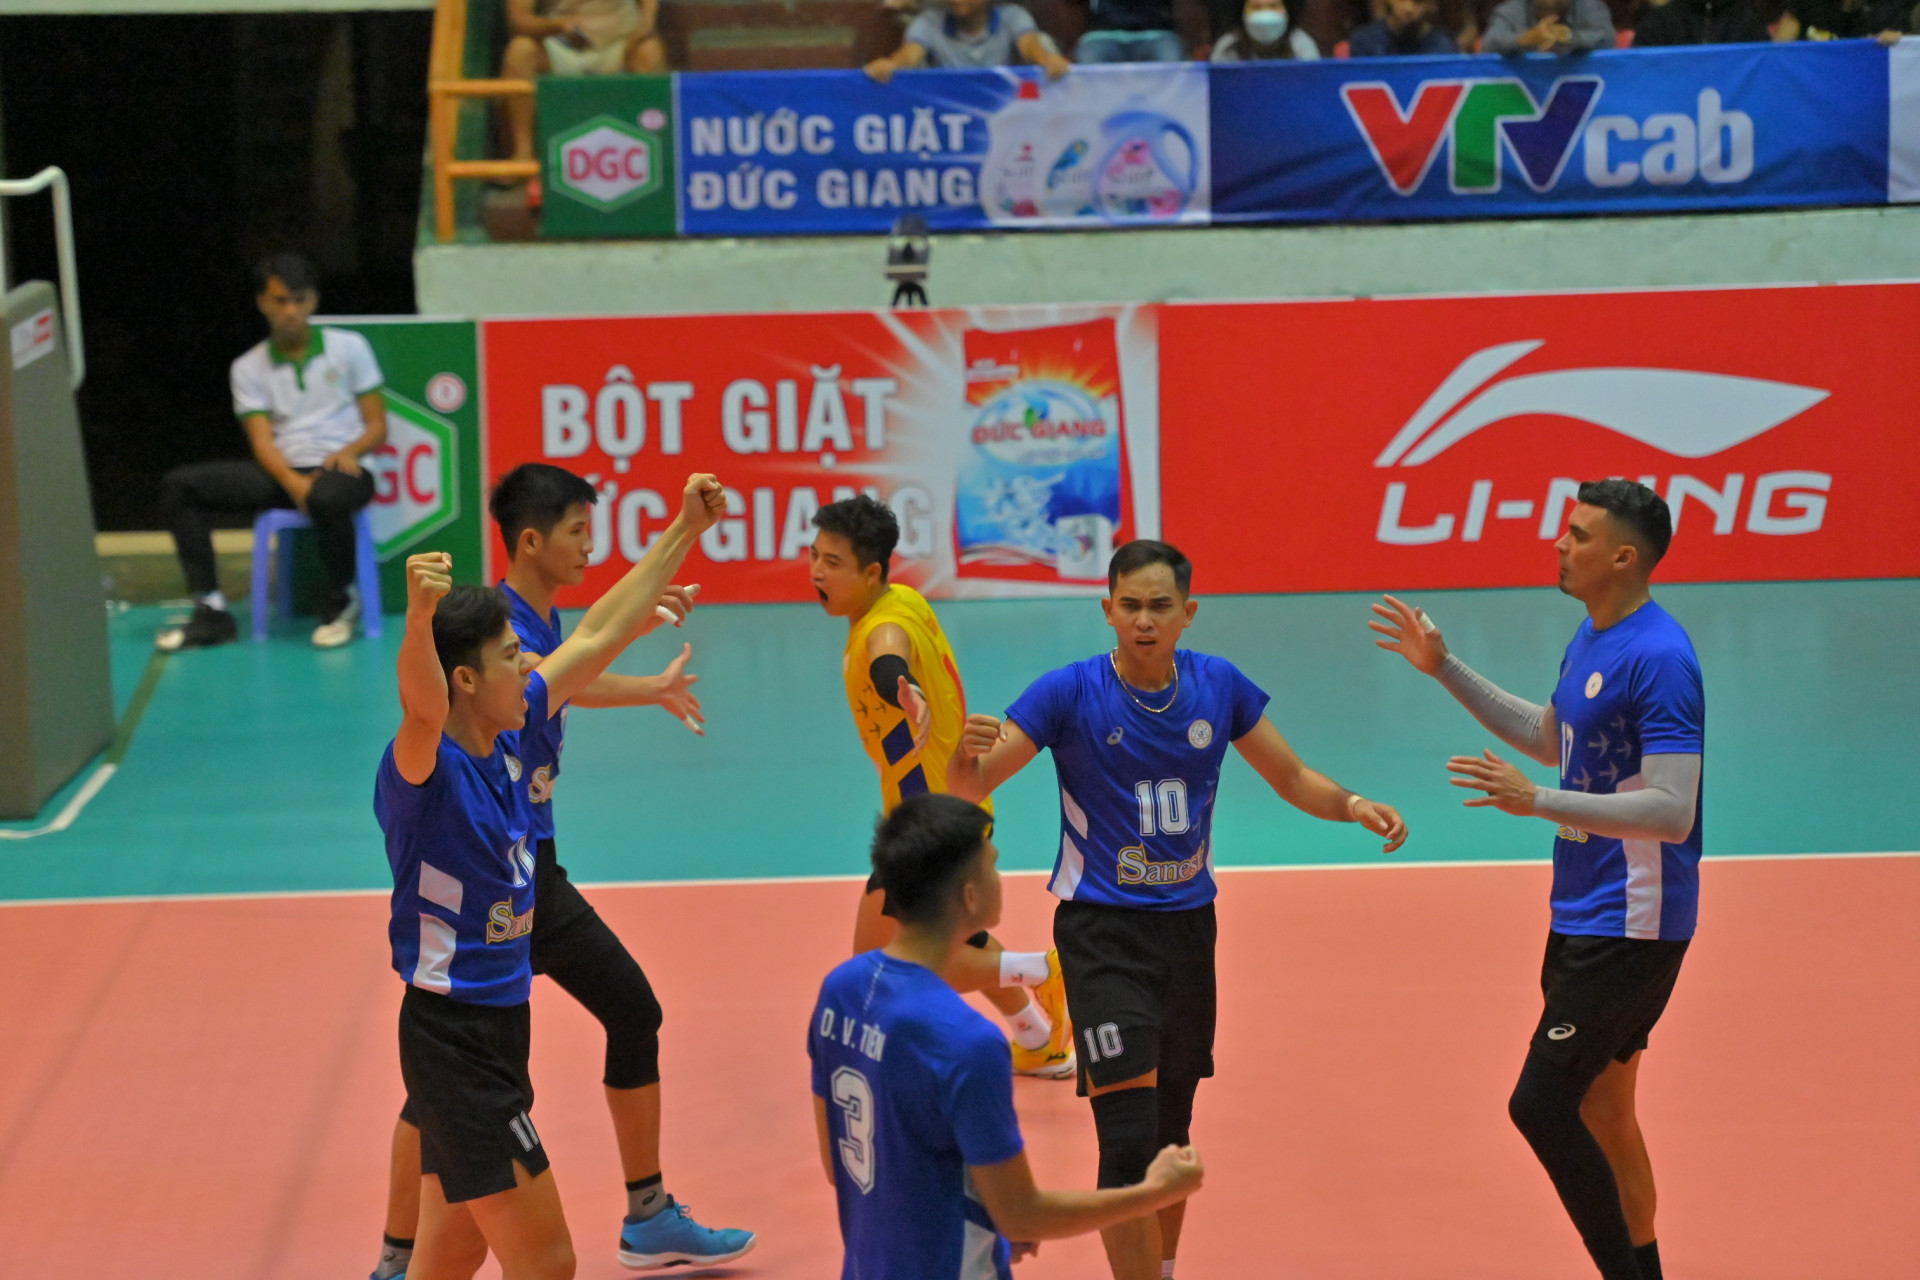 Sanest Khanh Hoa volleyball team aims for Hung Vuong Cup’s trophy